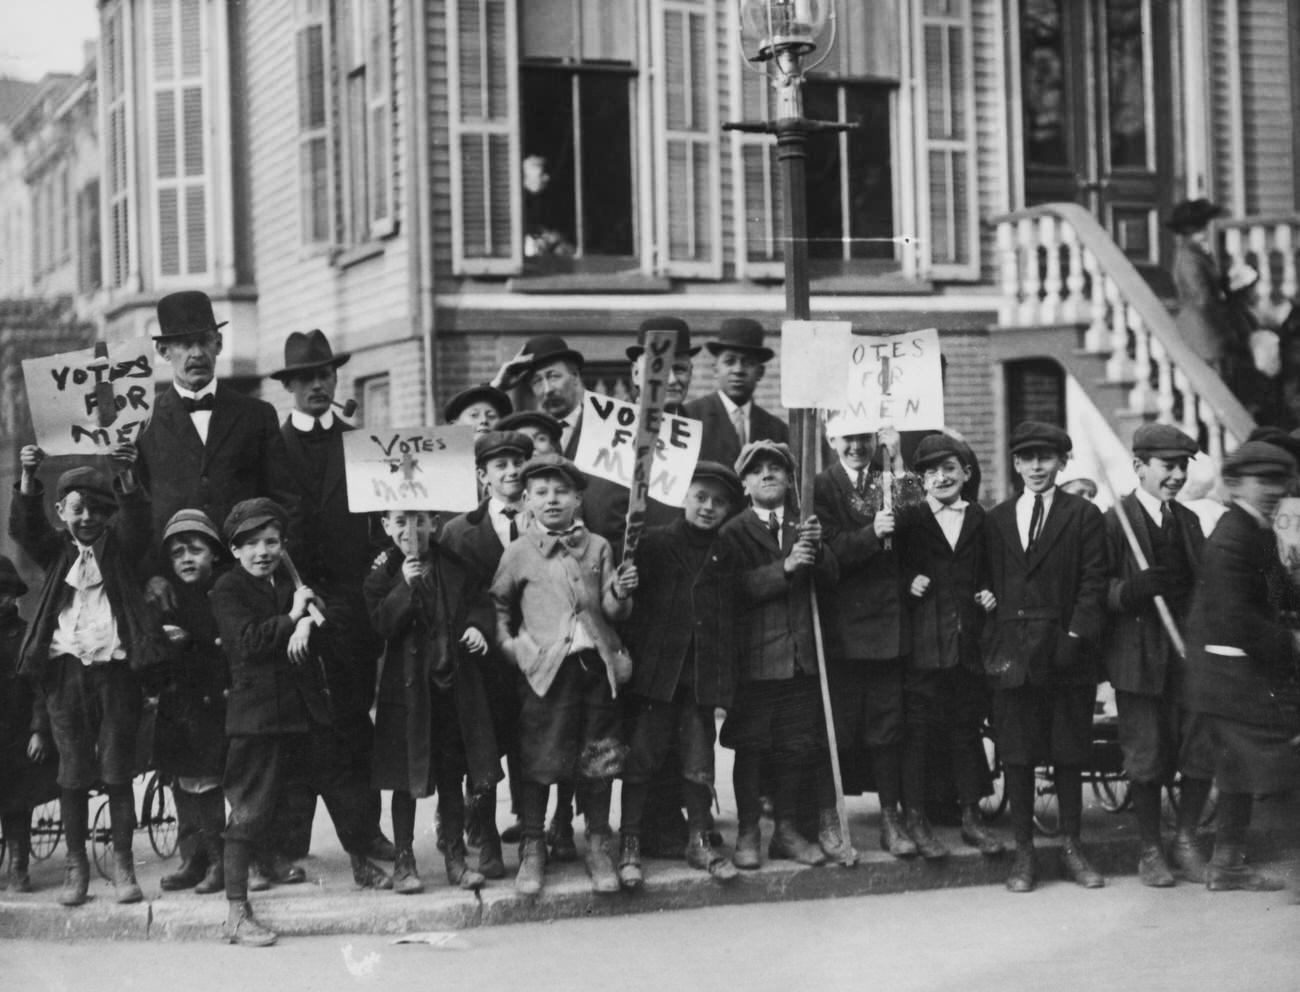 Men And Boys In 'Votes For Men' Contingent At Brooklyn Suffrage Parade, Circa 1915